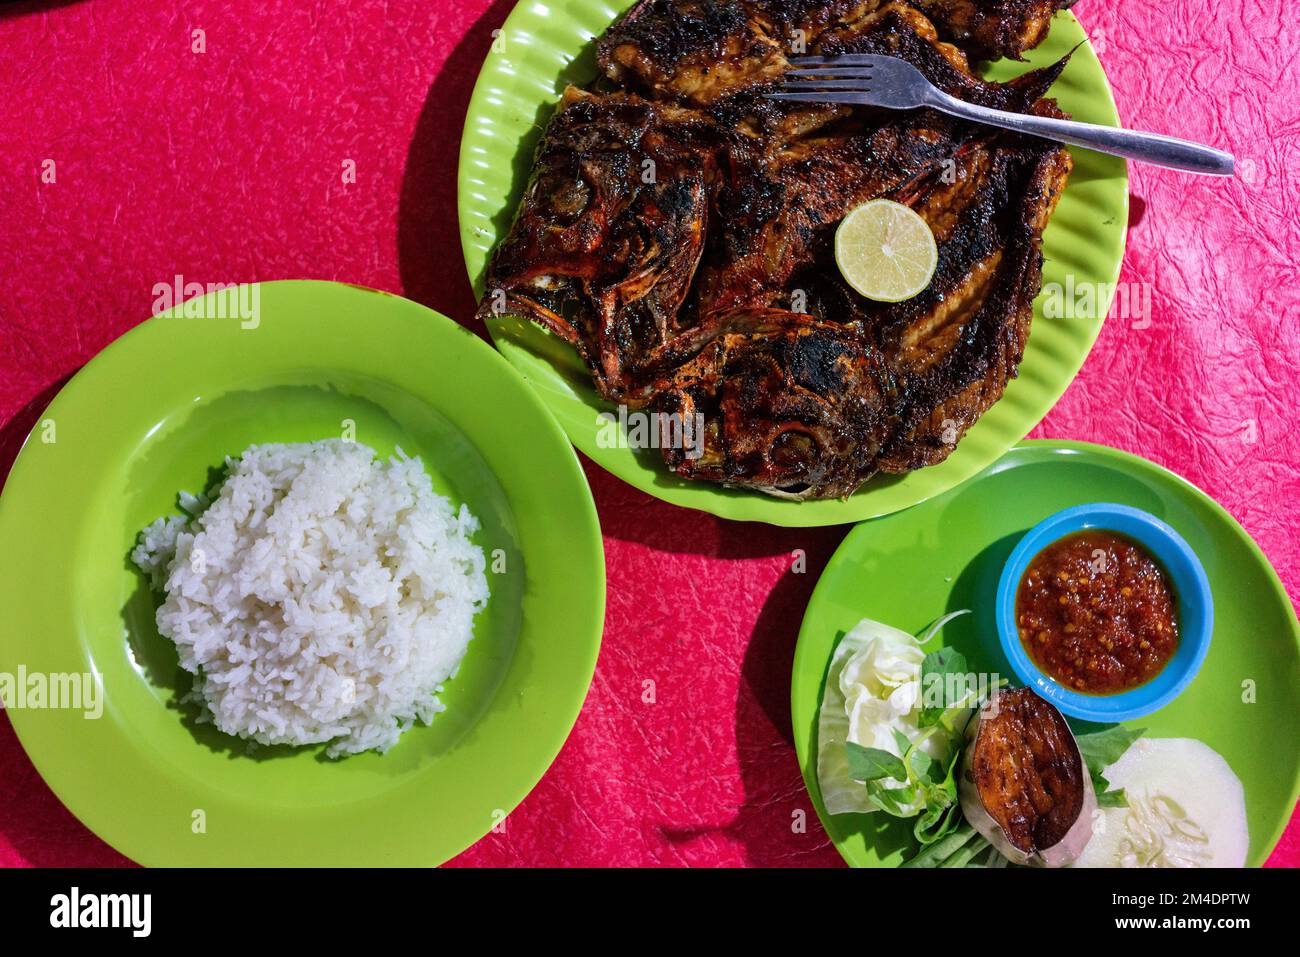 Dinner at the night market in Kupang. Stock Photo